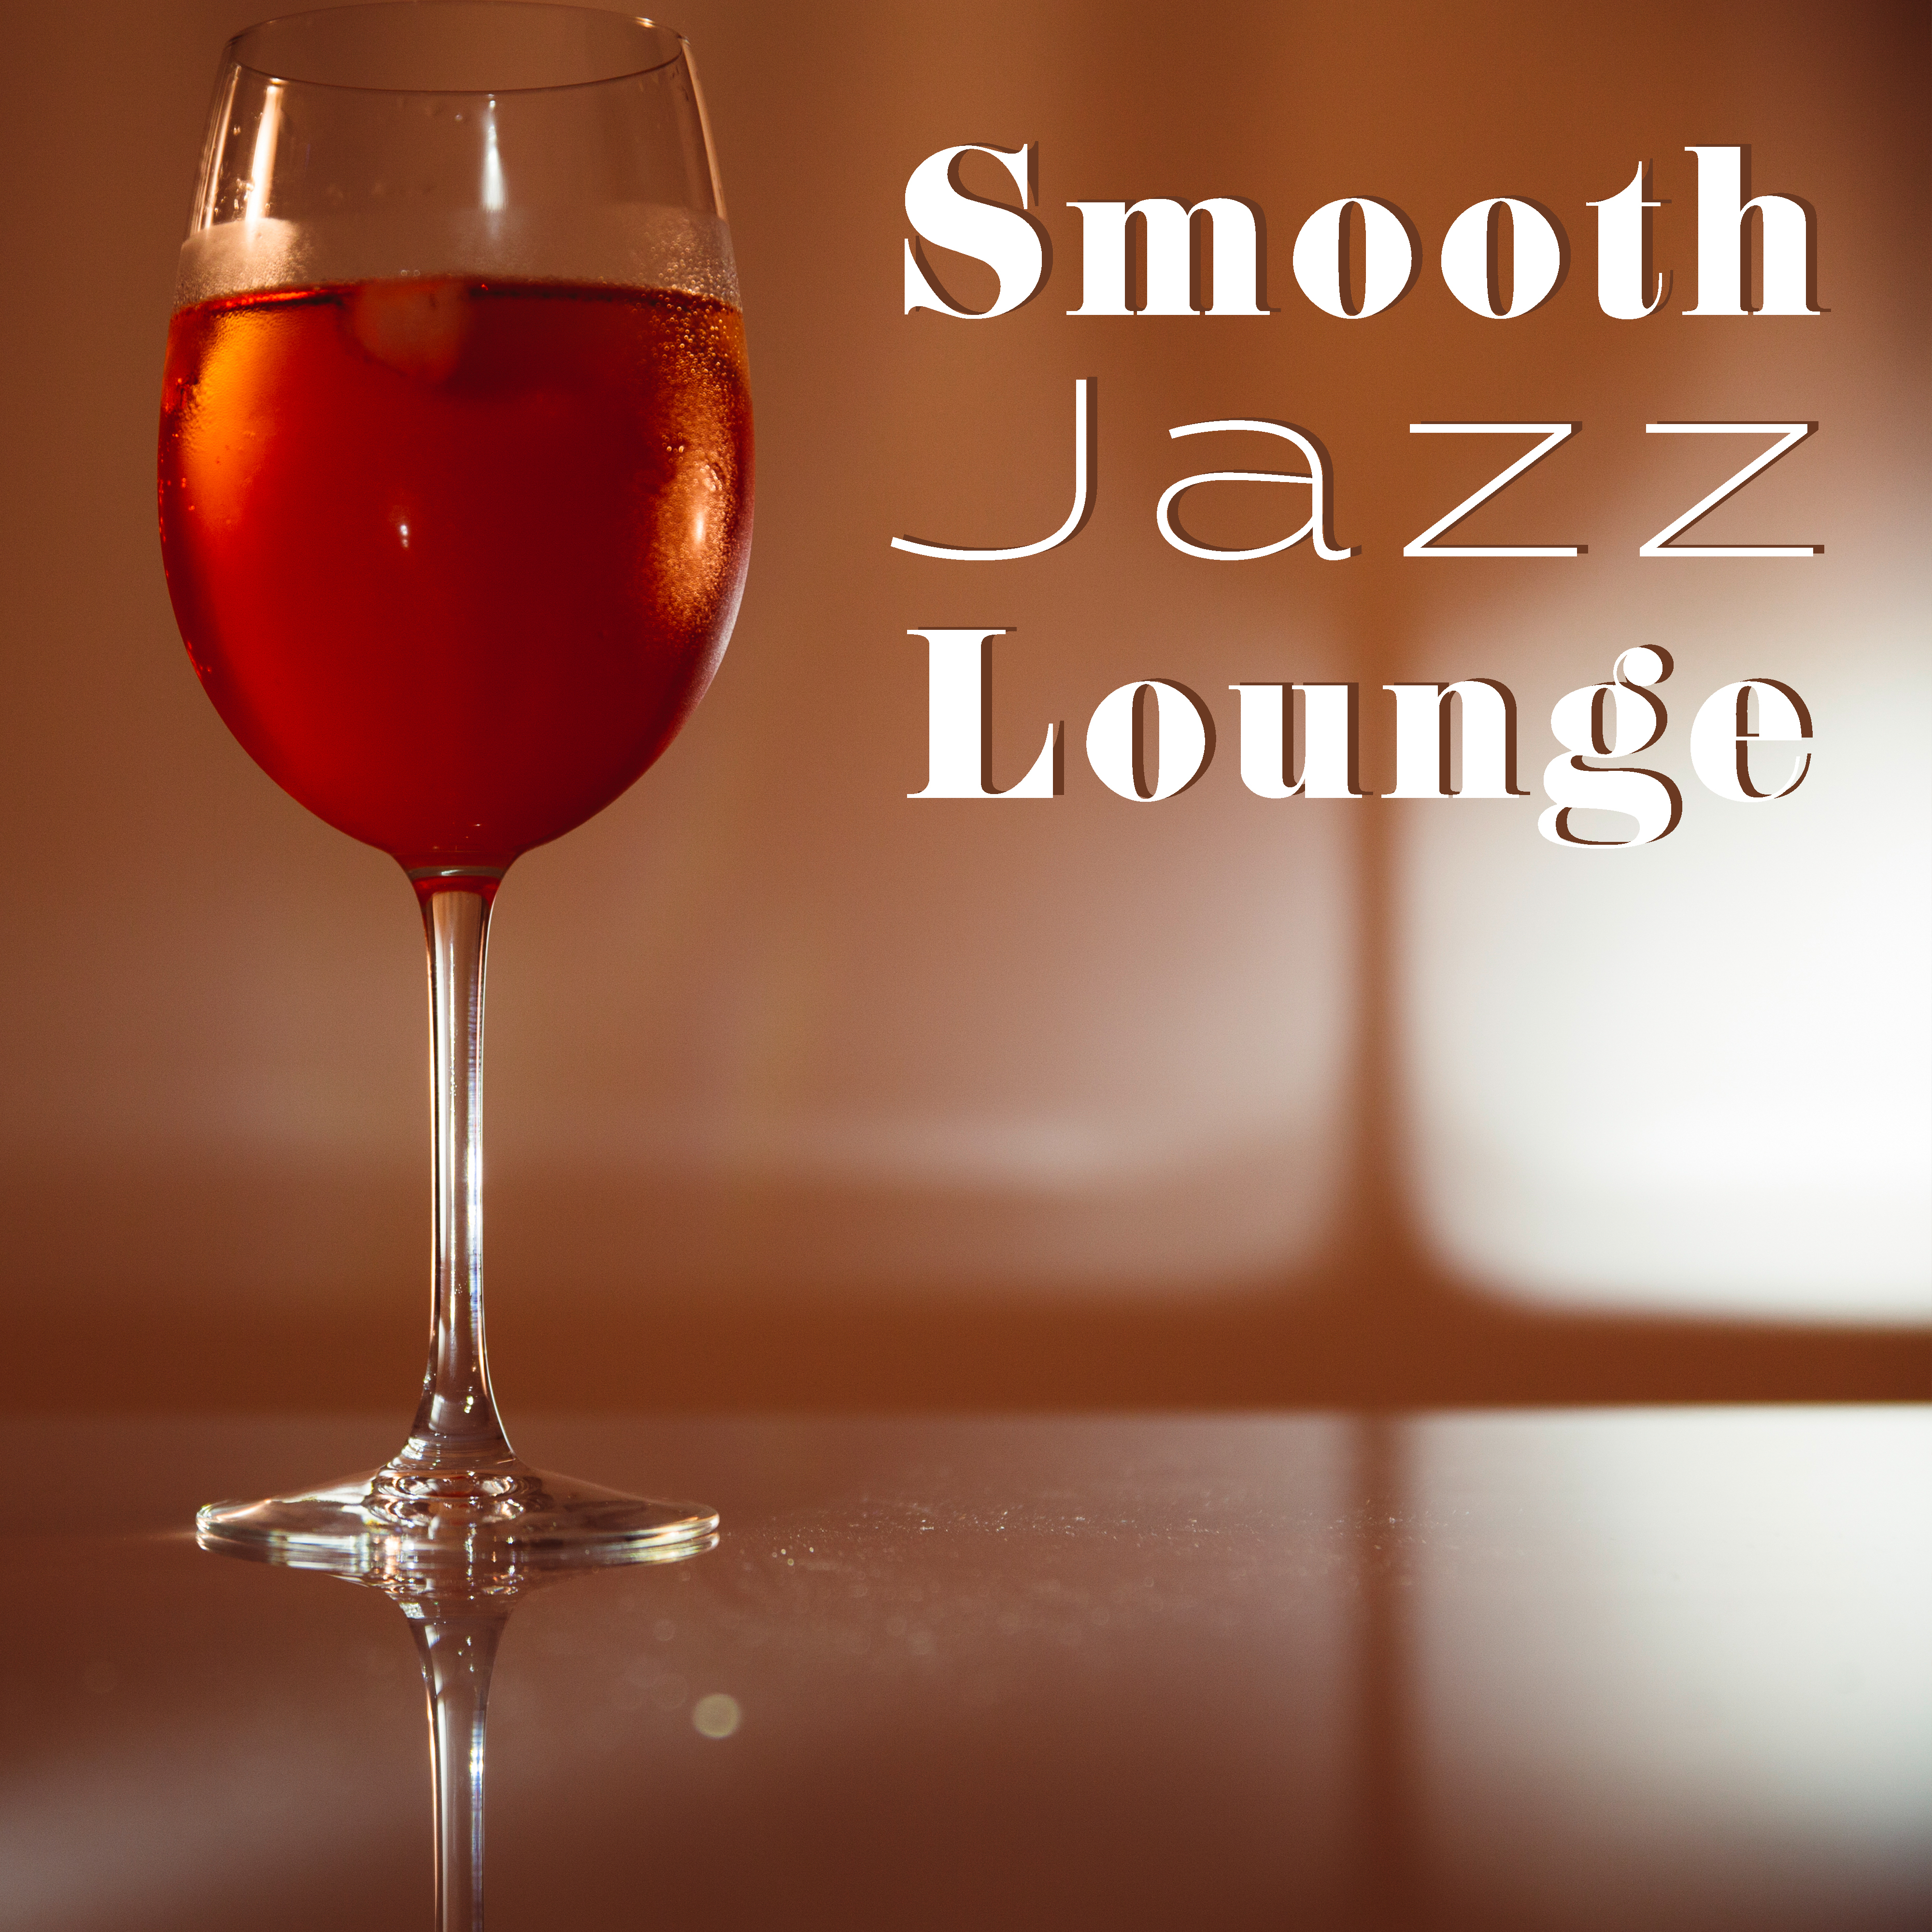 Smooth Jazz Lounge  Soft Sounds to Relax, Easy Listening, Stress Relief, Peaceful Note, Jazz Music